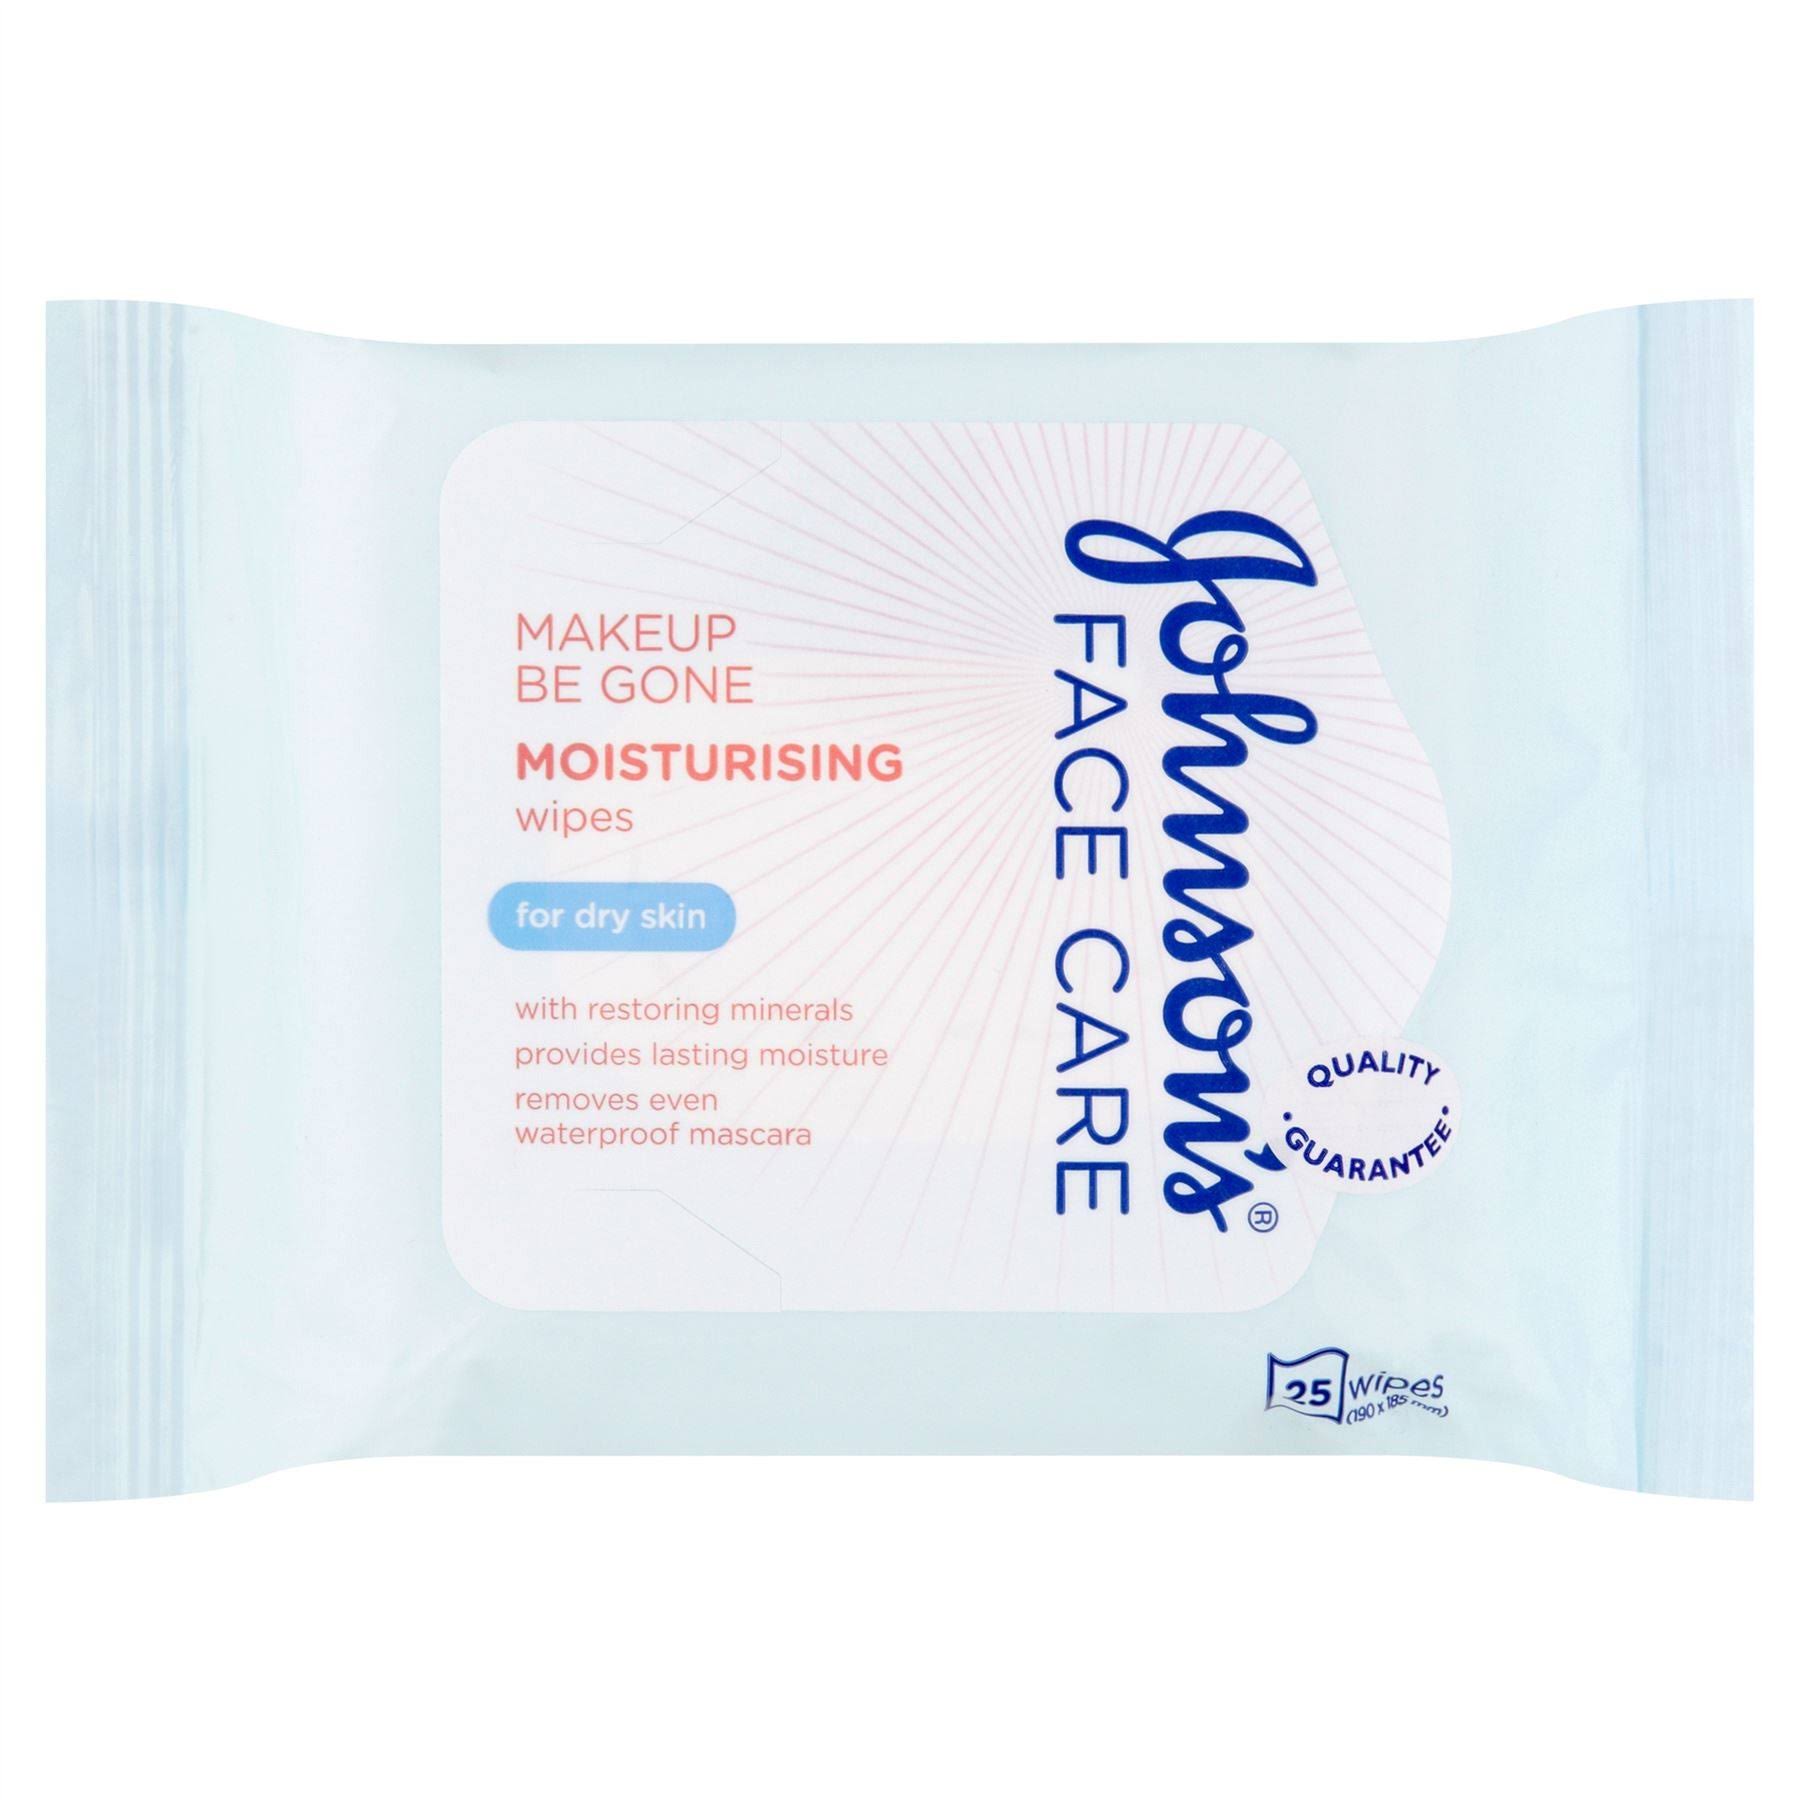 Johnson's Make-Up Be Gone 5 in 1 Moisturising Cleansing Wipes - 25 Wipes